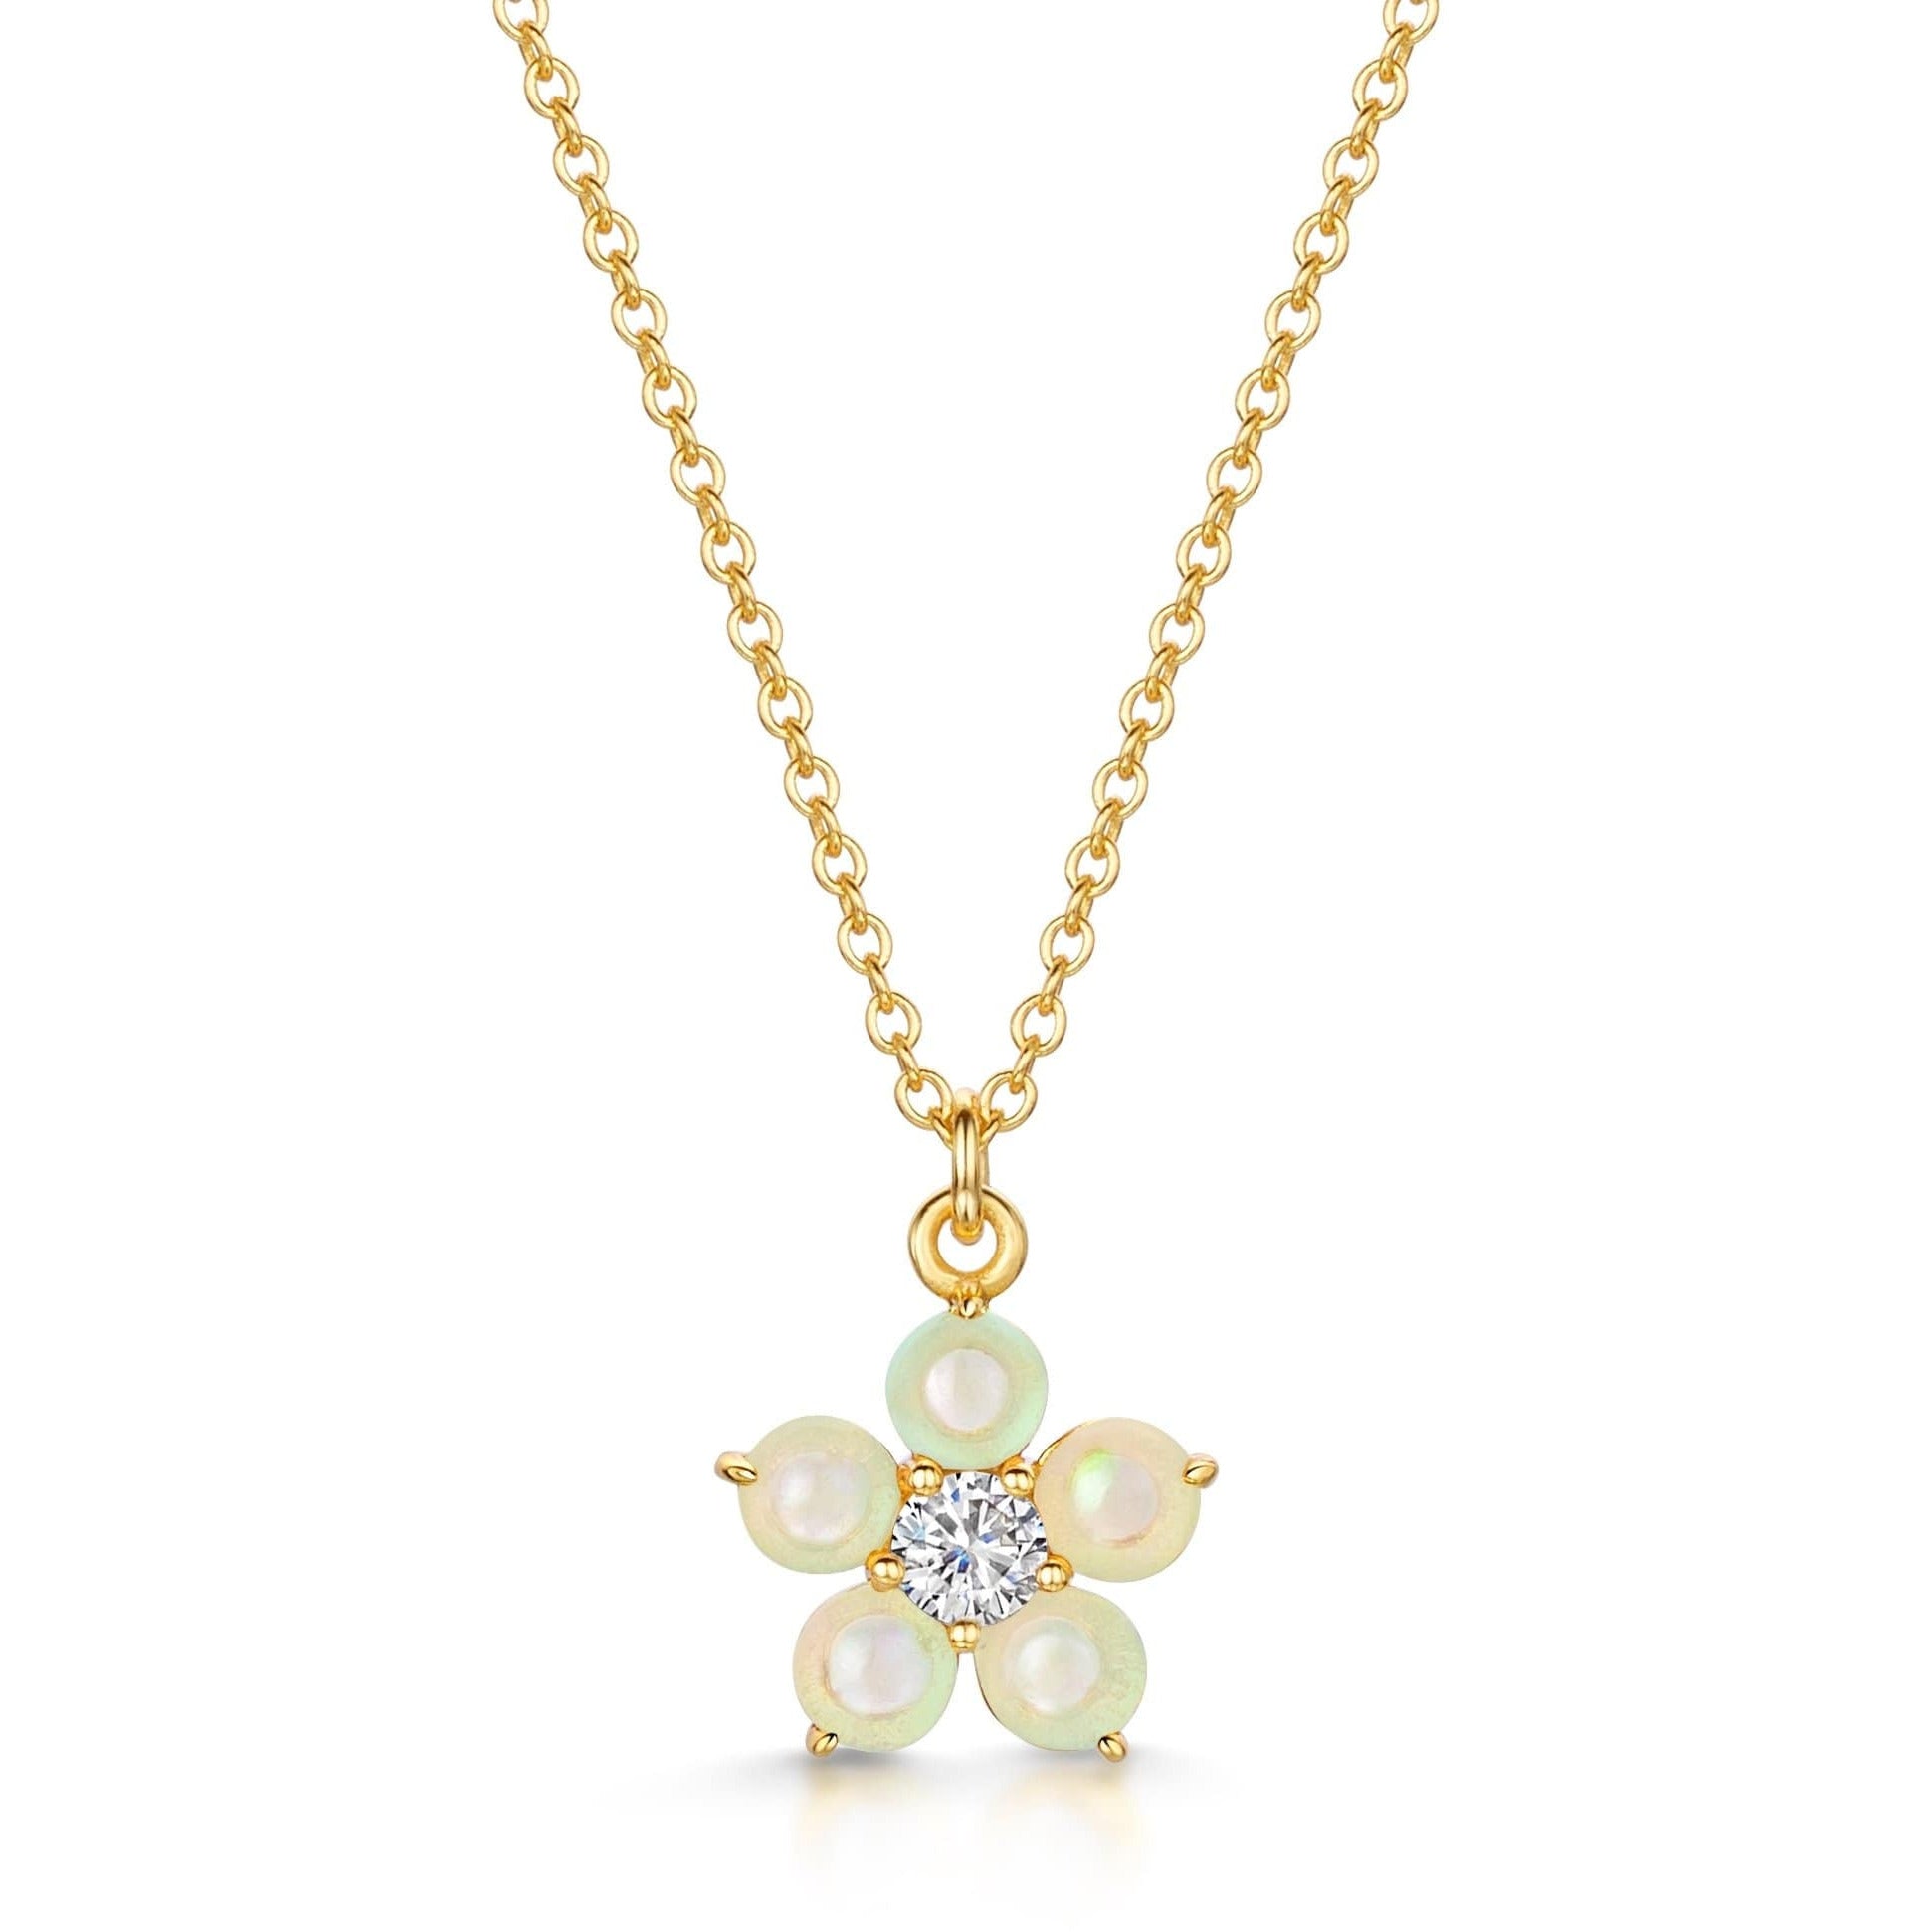 Fervor Montreal Necklace White Opal Daisy Necklace